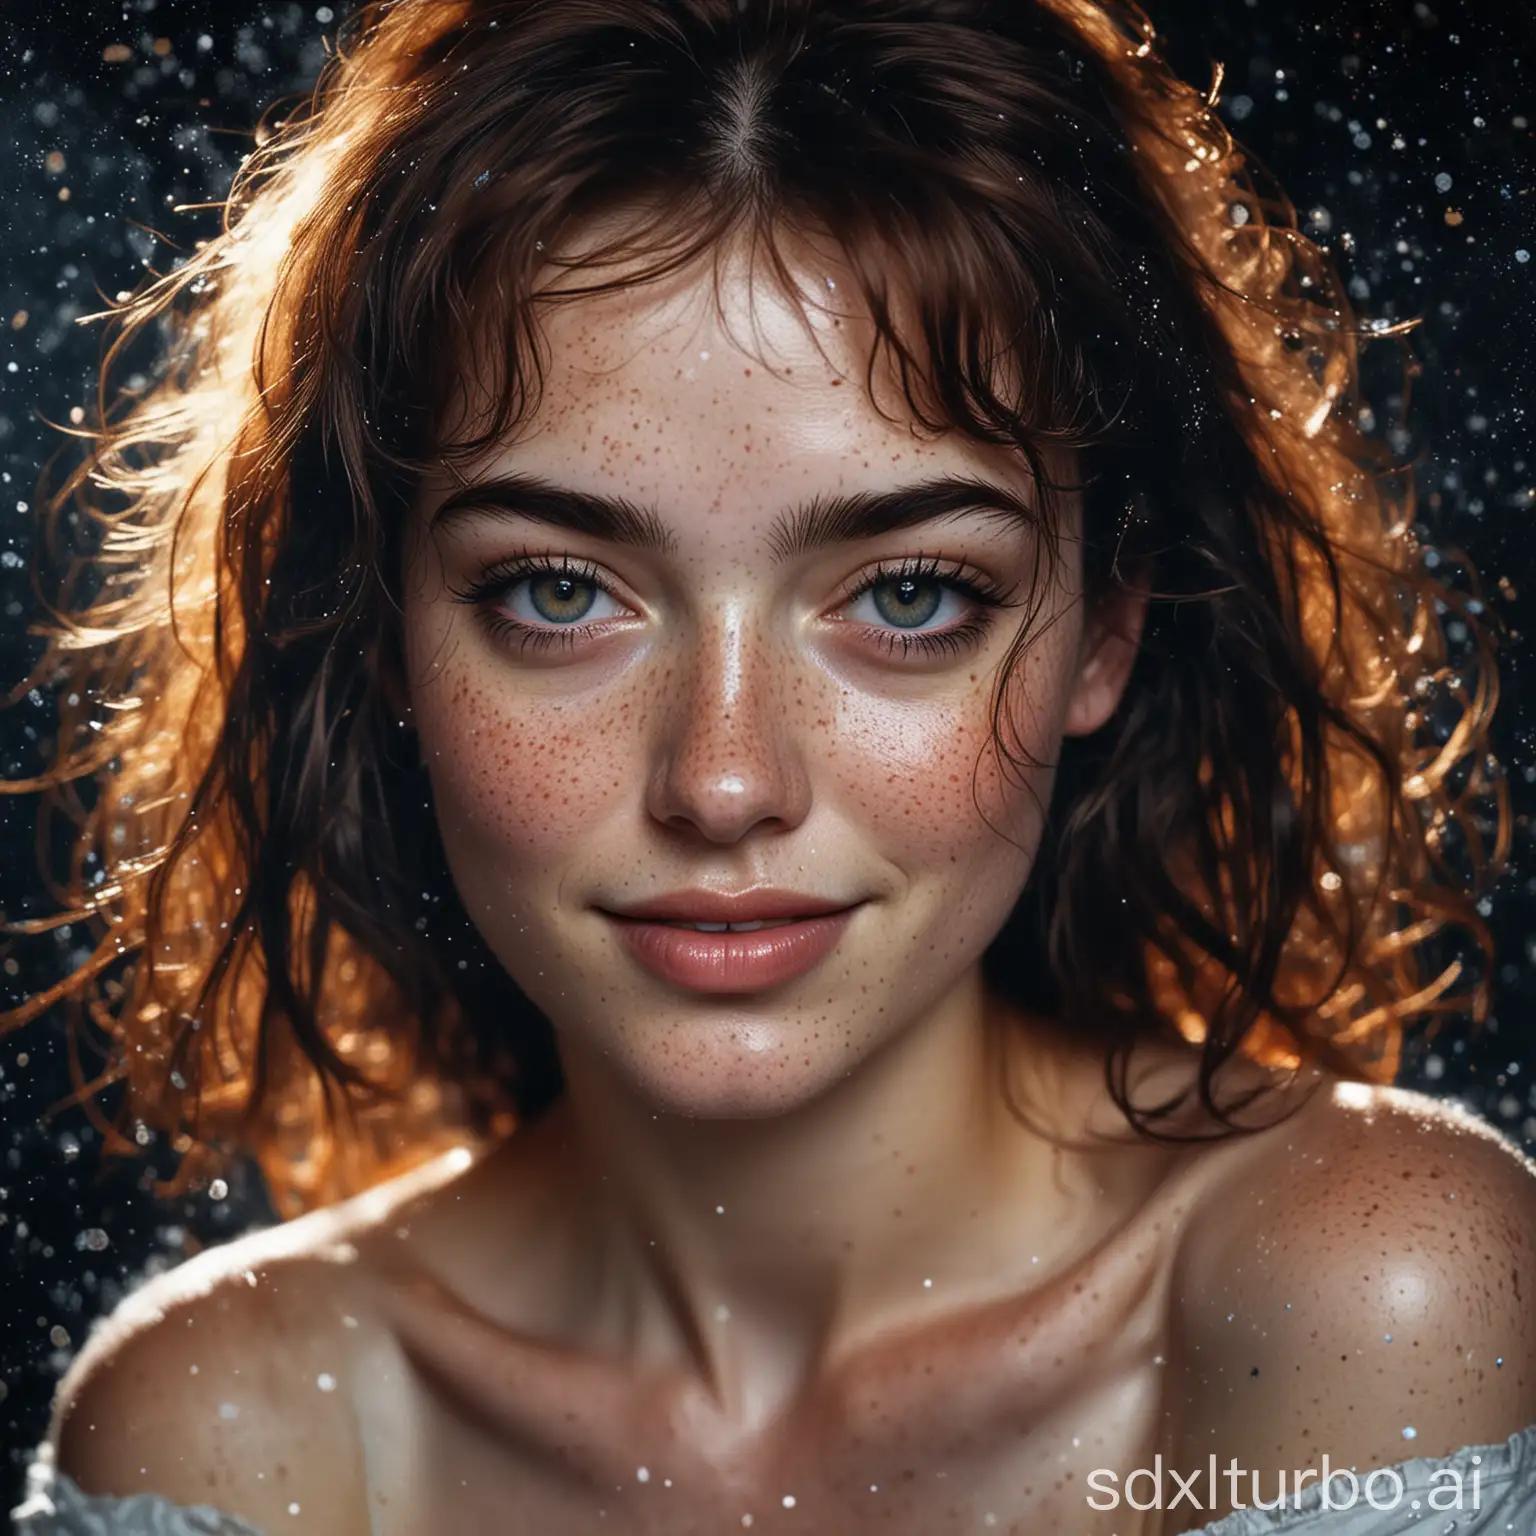 A stunning portrait of a radiant woman, her luminous smile and soulful hazel eyes captivating the viewer, a constellation of freckles dusting her skin like stardust, In the soft embrace of light, she emerges: a vision of loveliness framed by the inky curtain of her bangs, her features painted in bold strokes of shadow and highlight,
